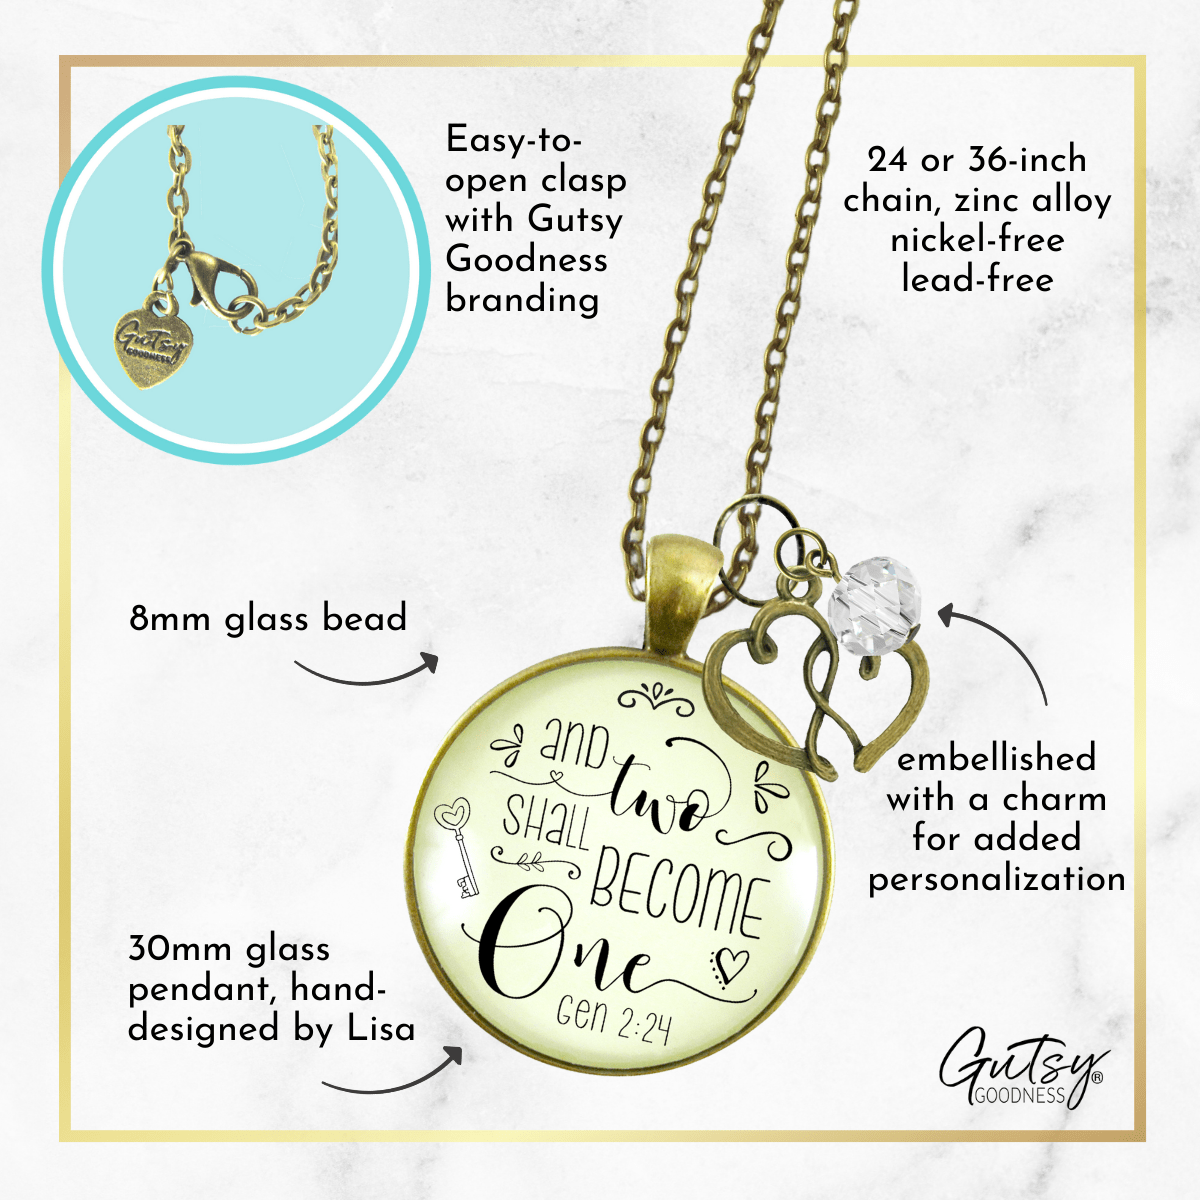 Gutsy Goodness Christian Couples Necklace Two Become One Jewelry Husband Wife Gift - Gutsy Goodness;Christian Couples Necklace Two Become One Jewelry Husband Wife Gift - Gutsy Goodness Handmade Jewelry Gifts